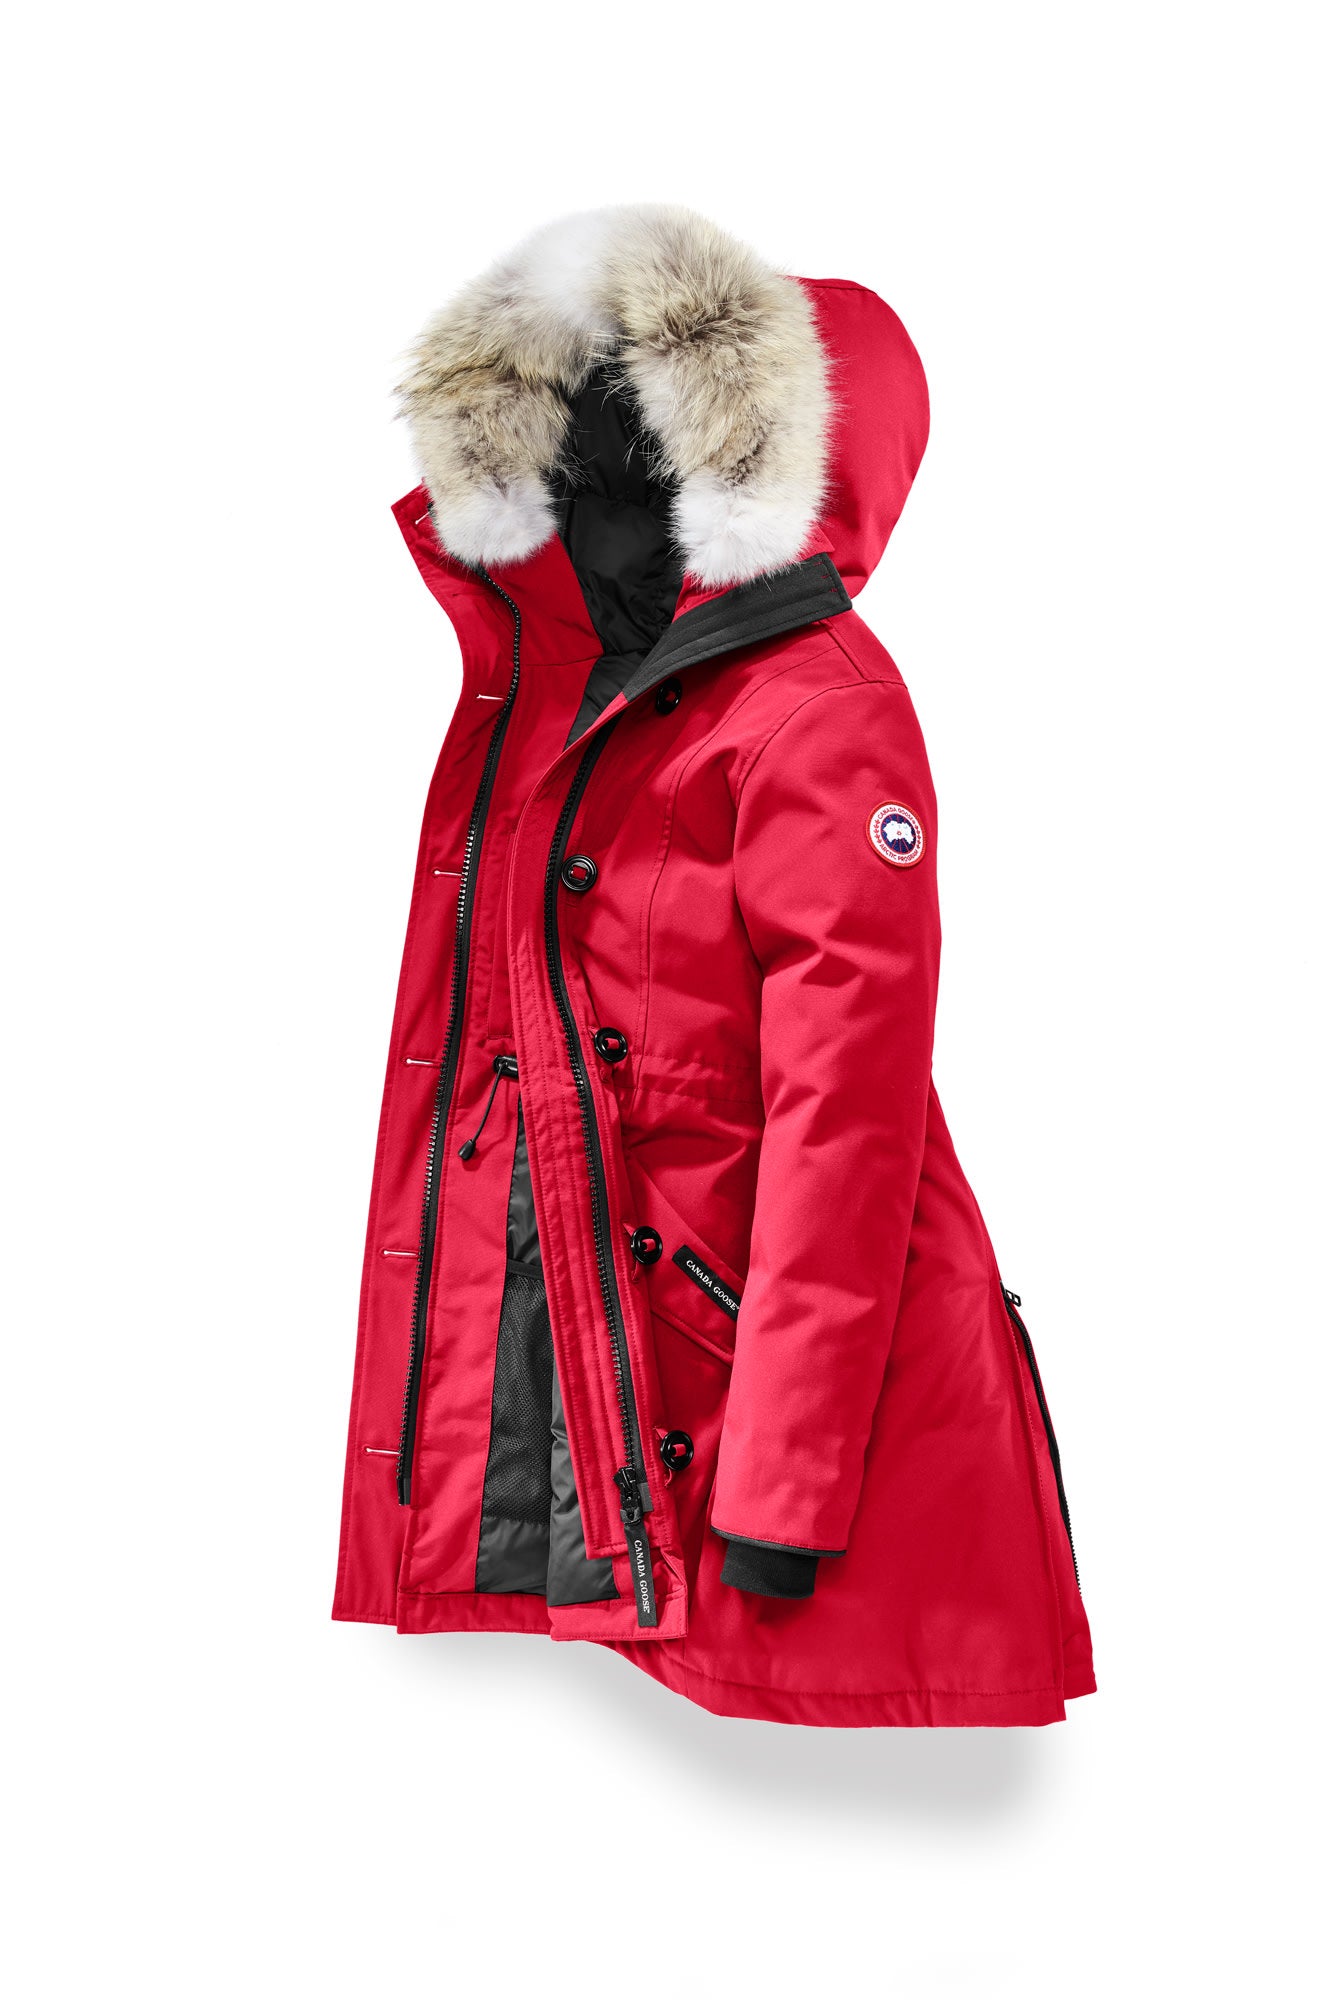 Uva abeja presentación CANADA GOOSE WOMEN'S ROSSCLAIR PARKA with Fur - Red – Totem Brand Co.